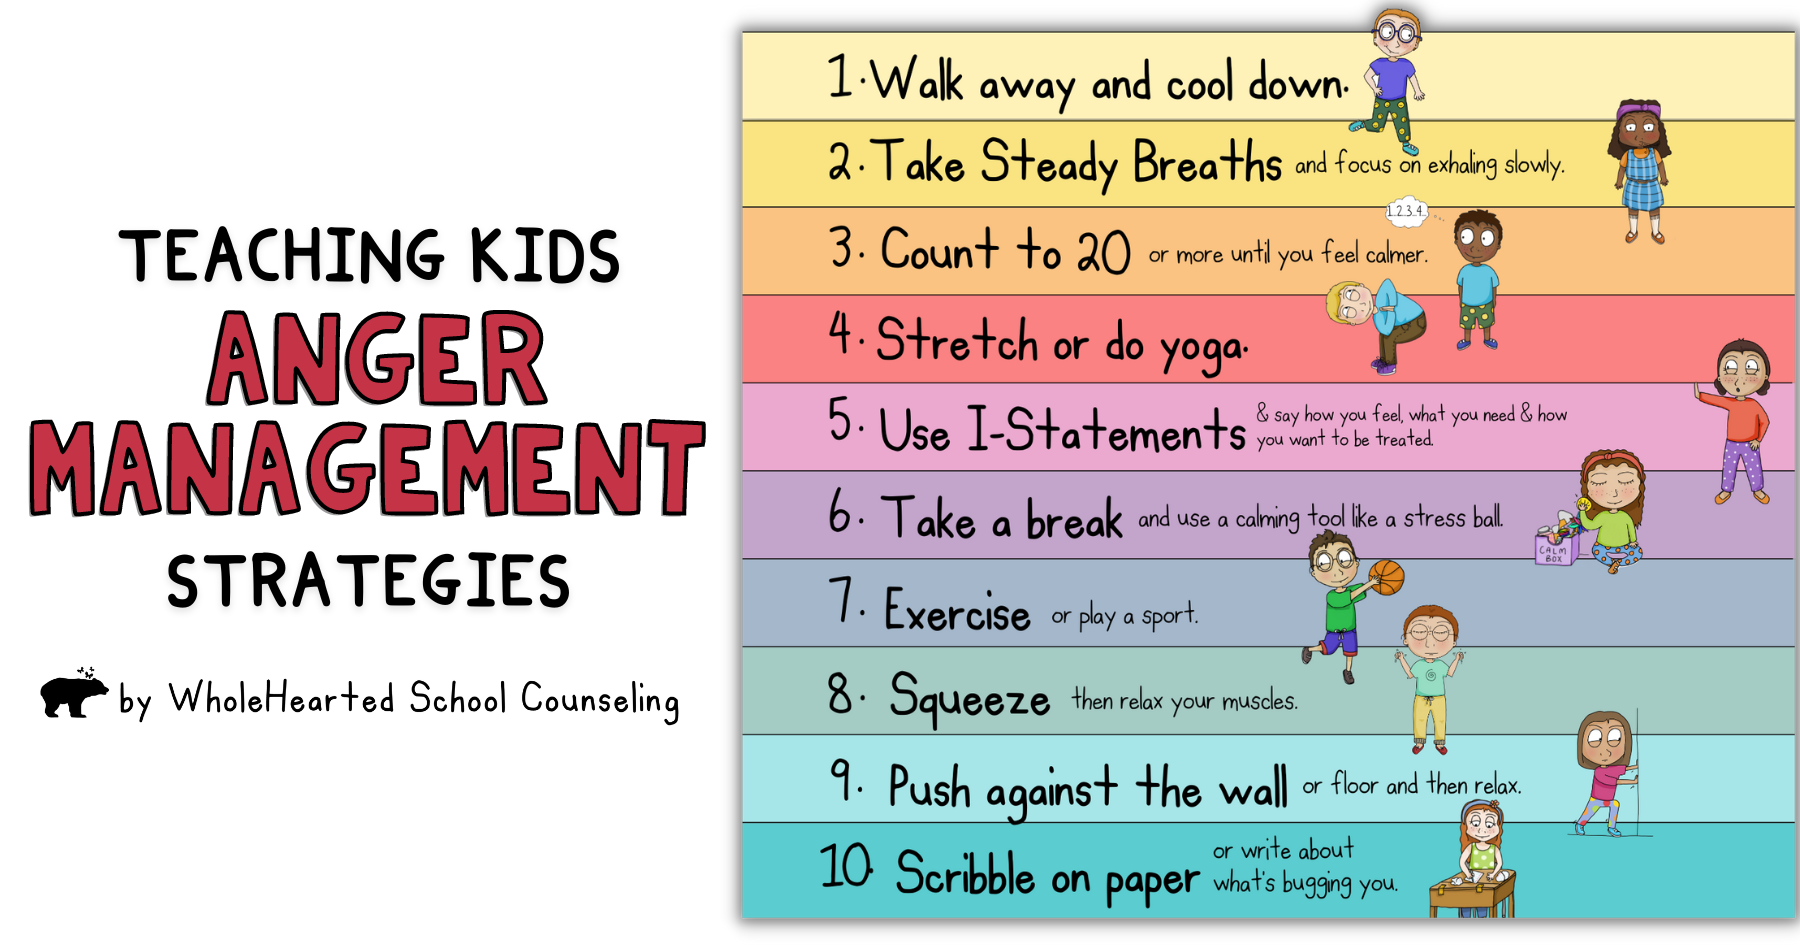 Teaching Anger Management Strategies for Kids by WholeHearted School Counseling